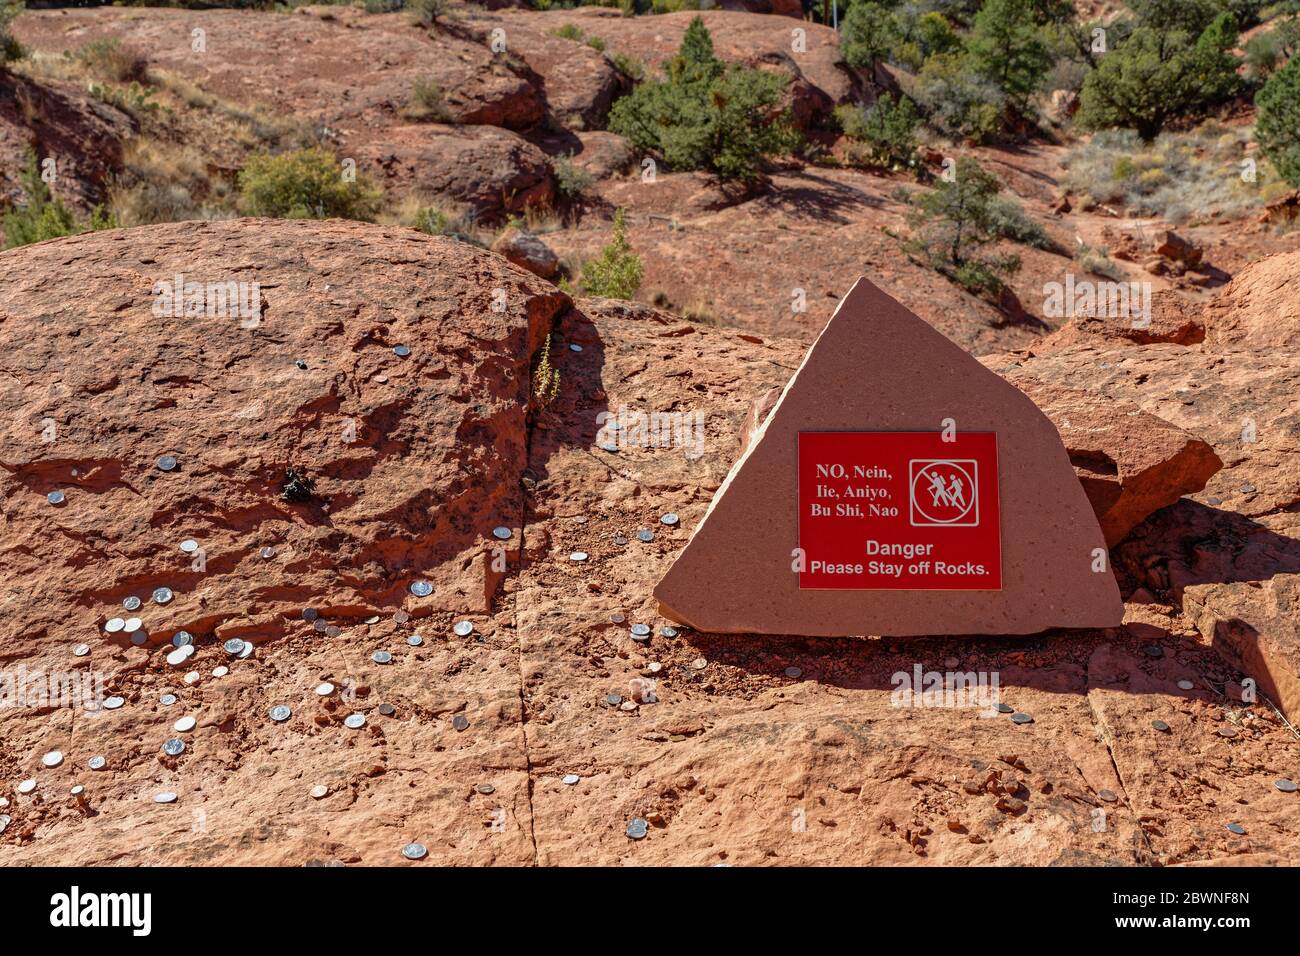 Danger sign on the rocks in the Sedona area with no hiking in several languages including Chinese, Japanese, Korean, and German as well as tossed coin Stock Photo